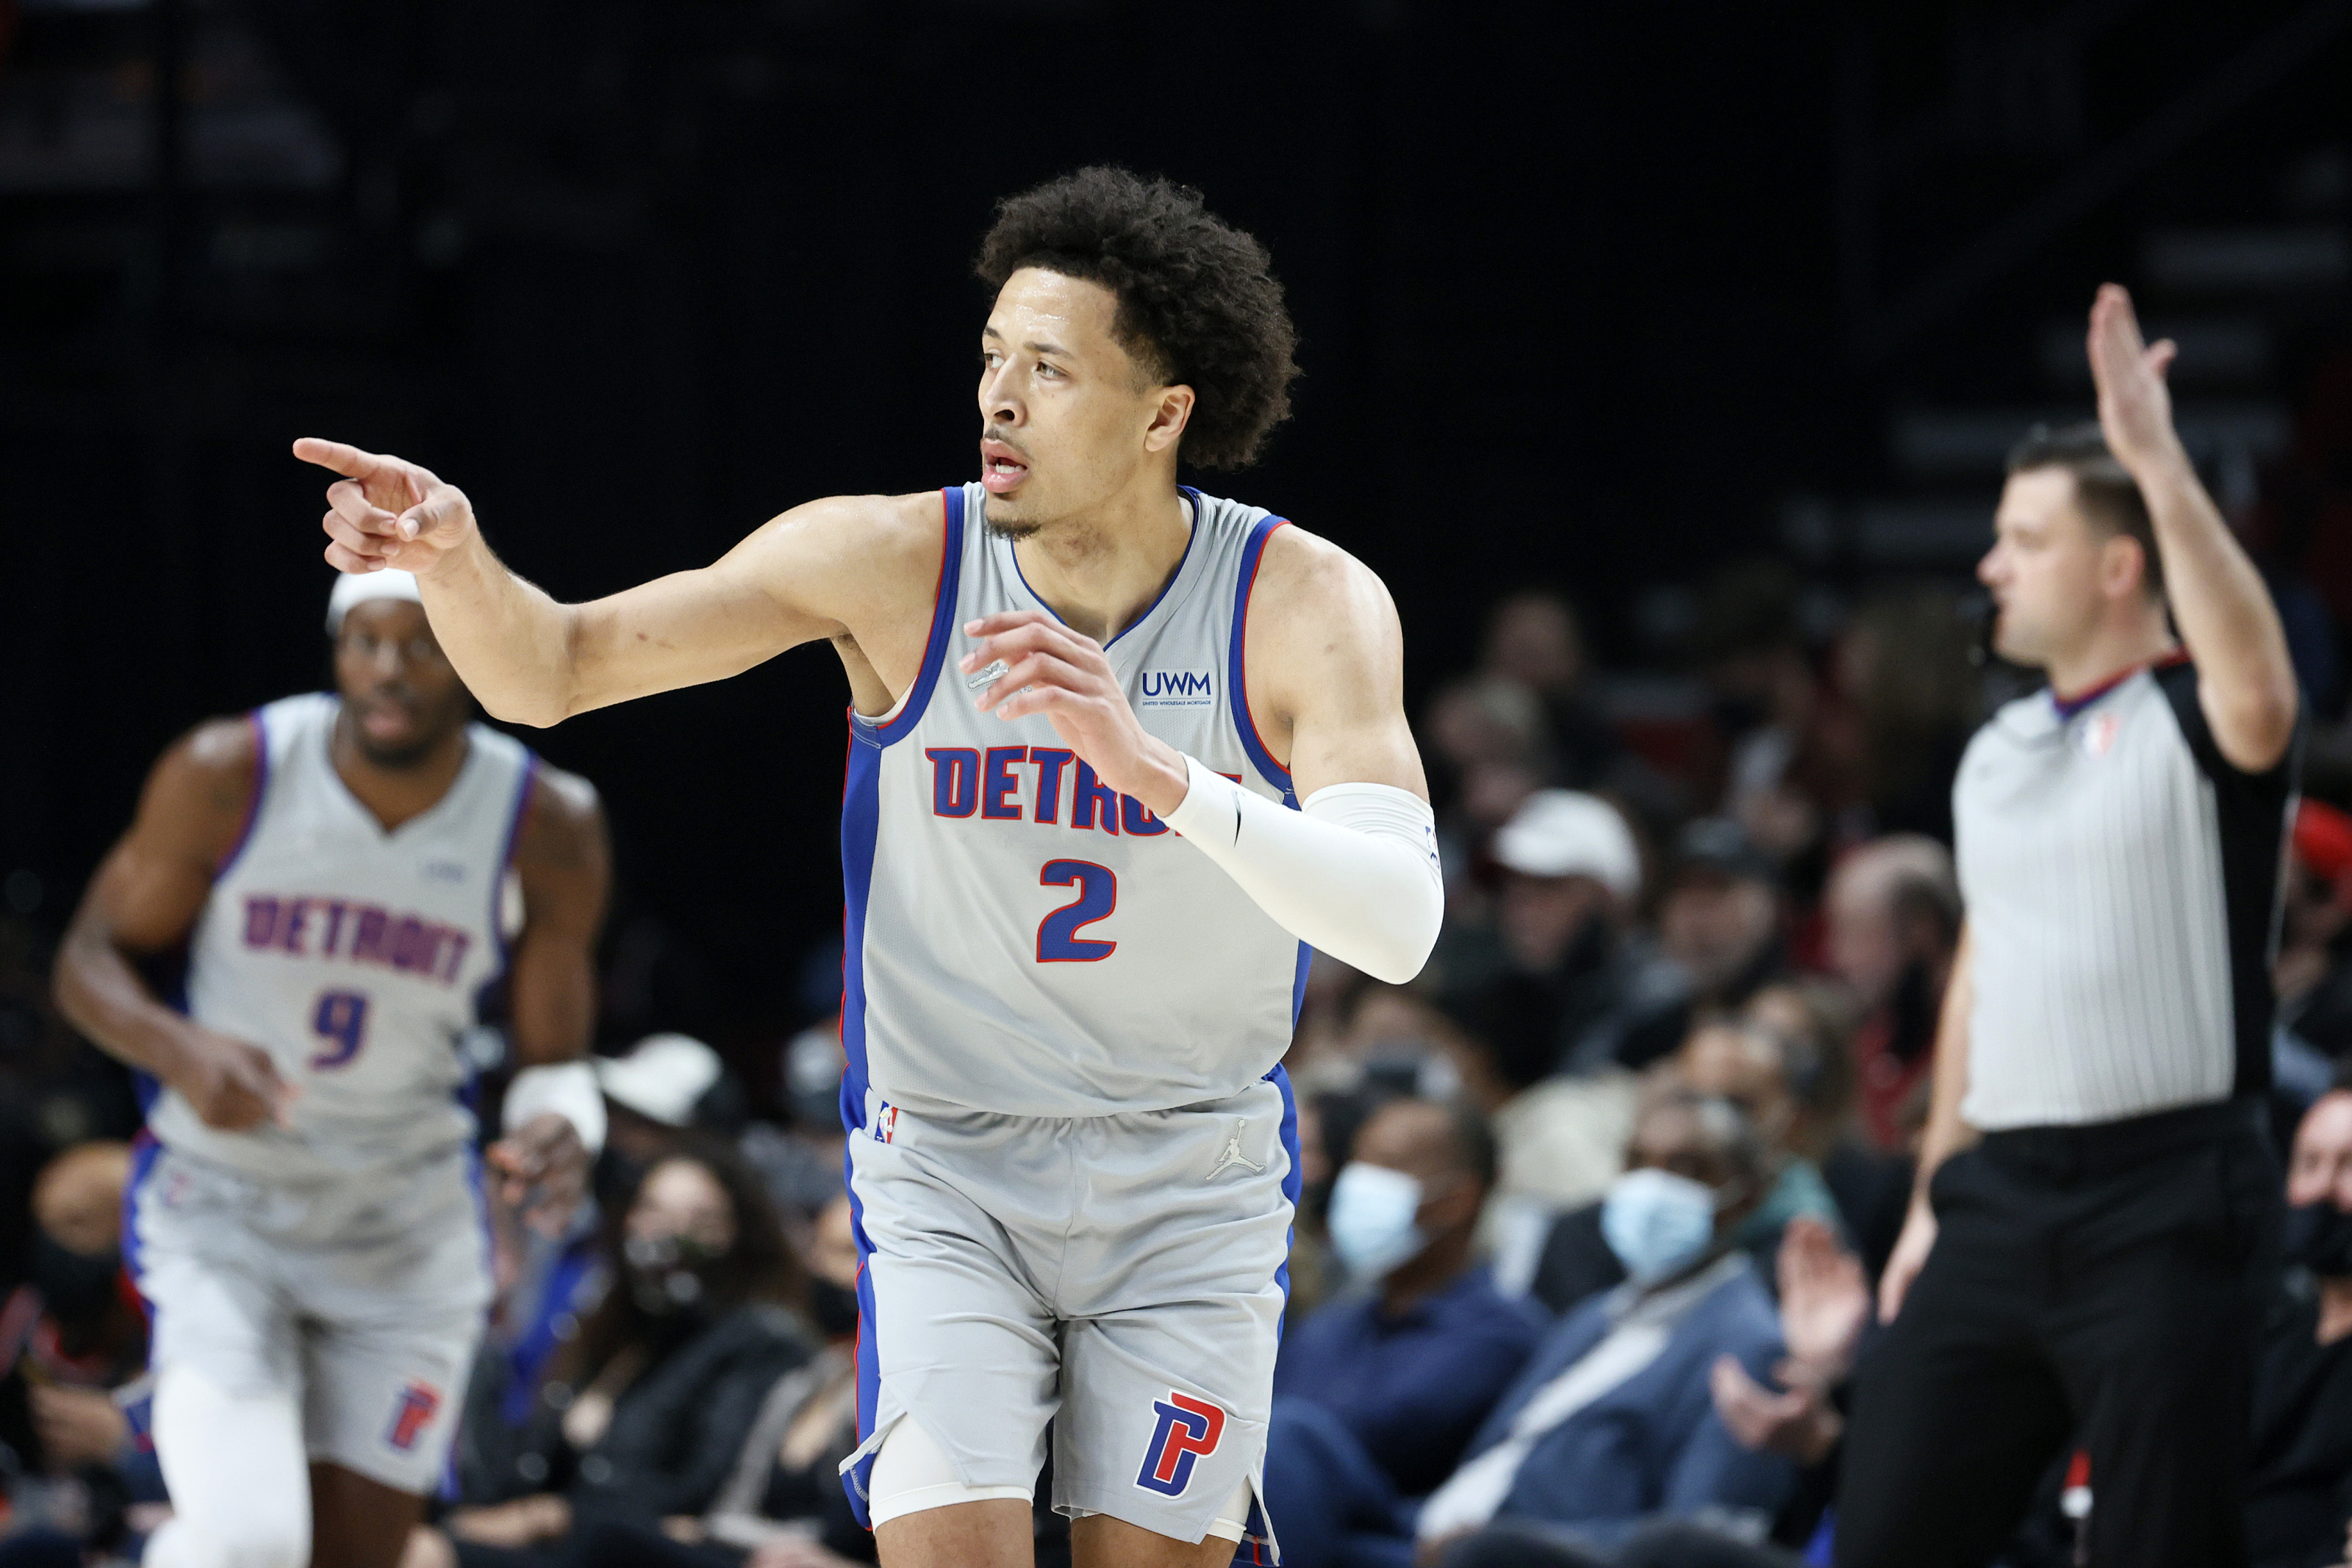 Cade Cunningham is closer to rookie Luka Doncic than you might think